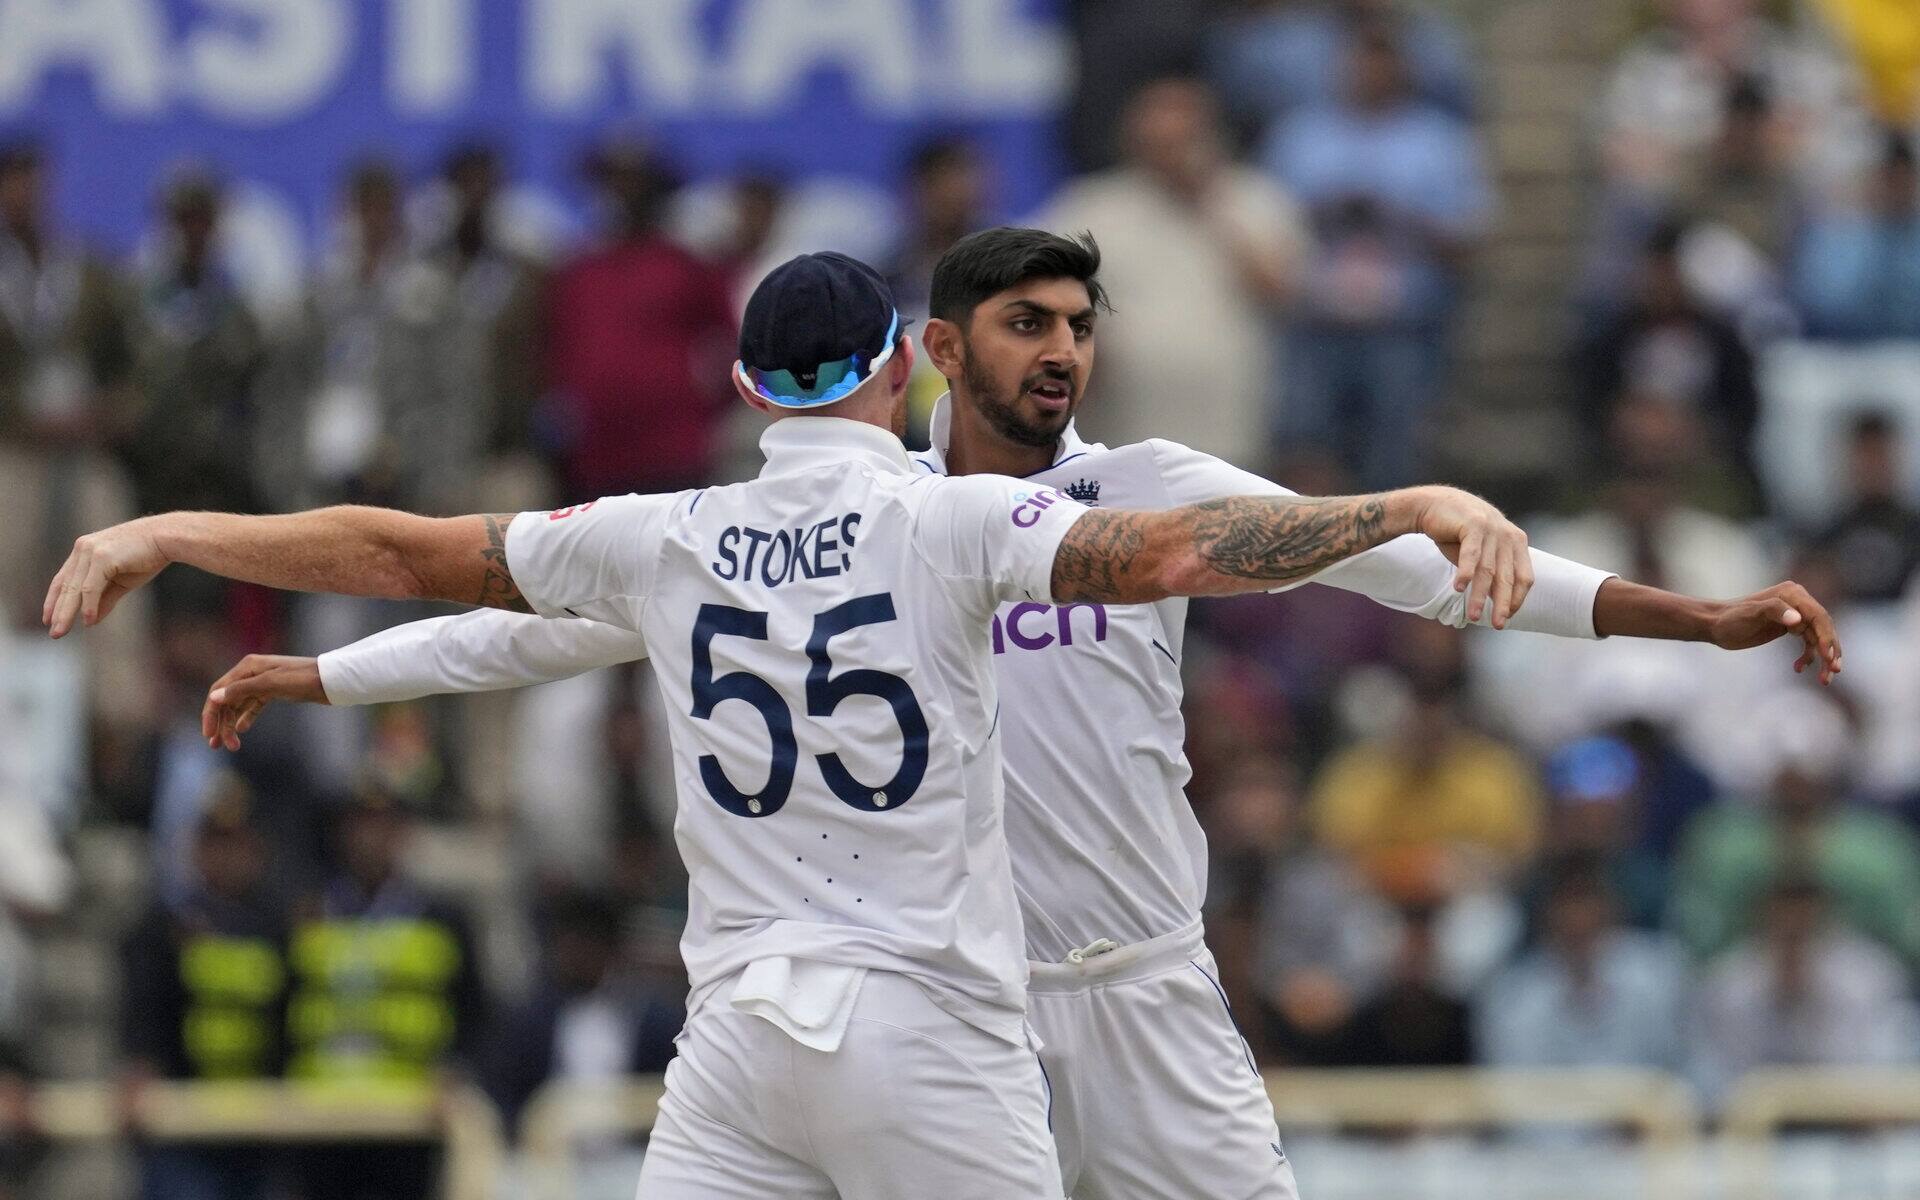 IND Vs ENG, 4th Test, Day 2: Live Score, Highlights, Match Updates & Live Streaming